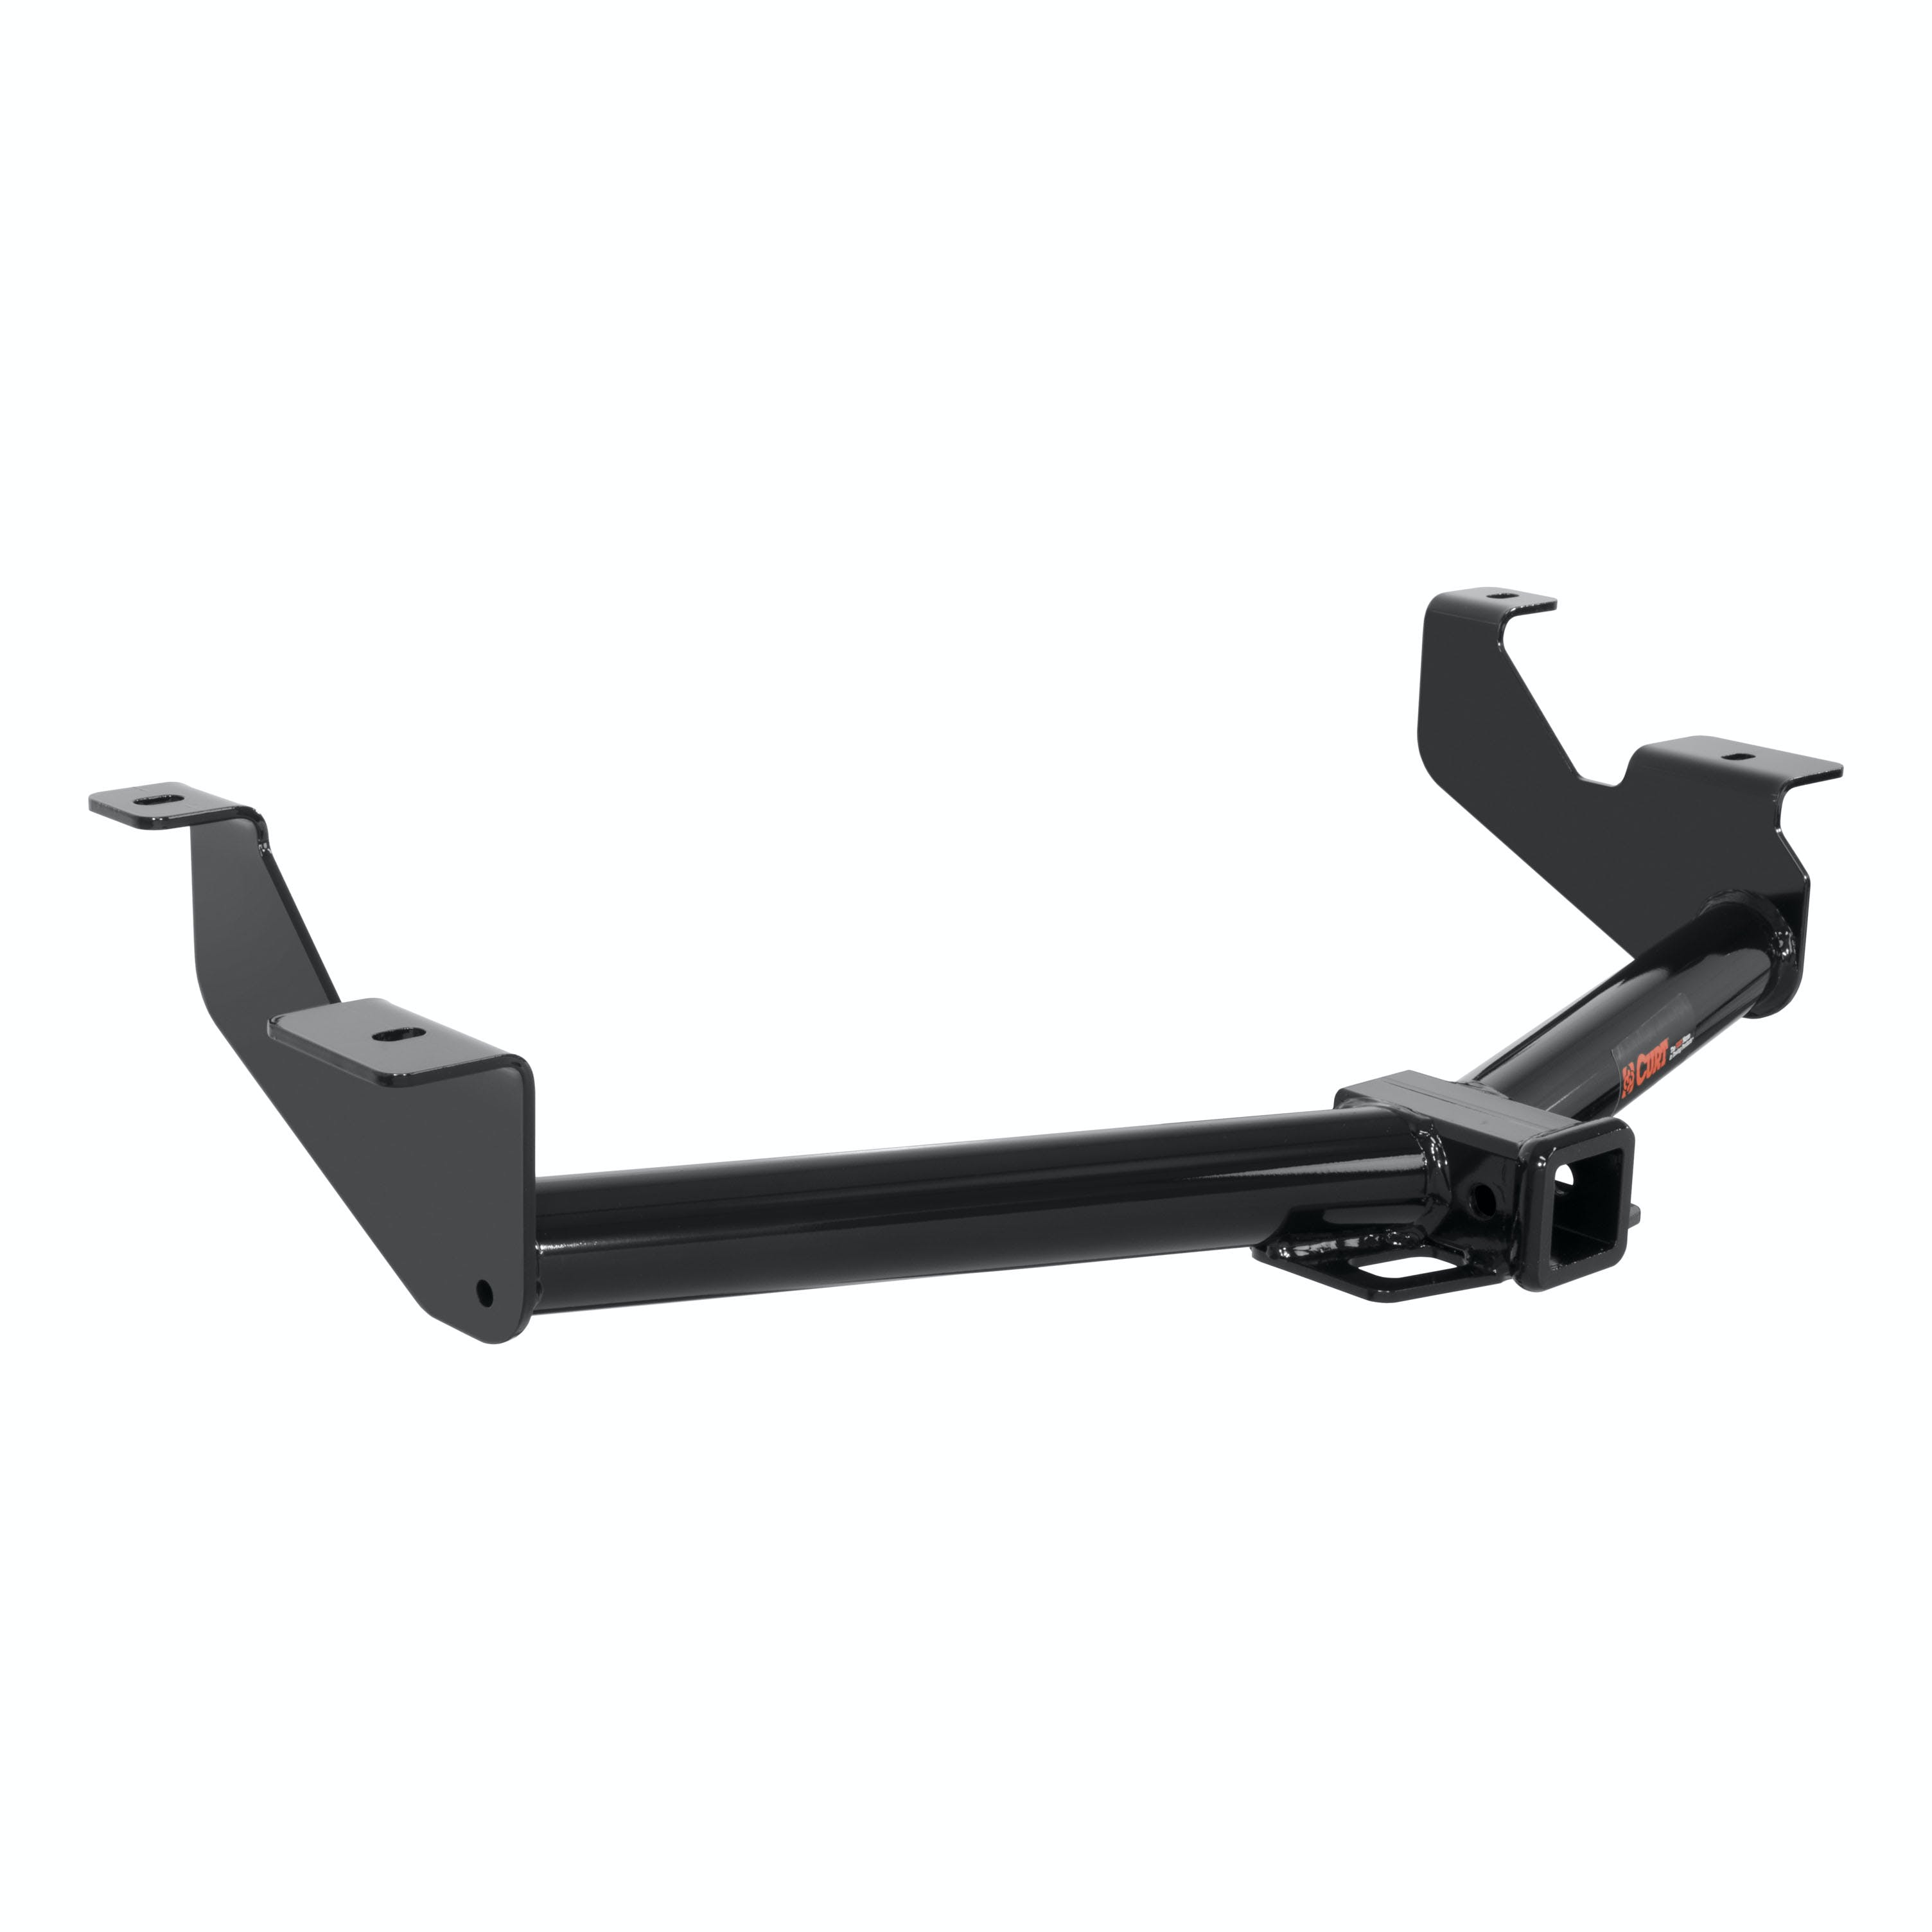 CURT 13167 Class 3 Trailer Hitch, 2 Receiver, Select Ford Transit Connect